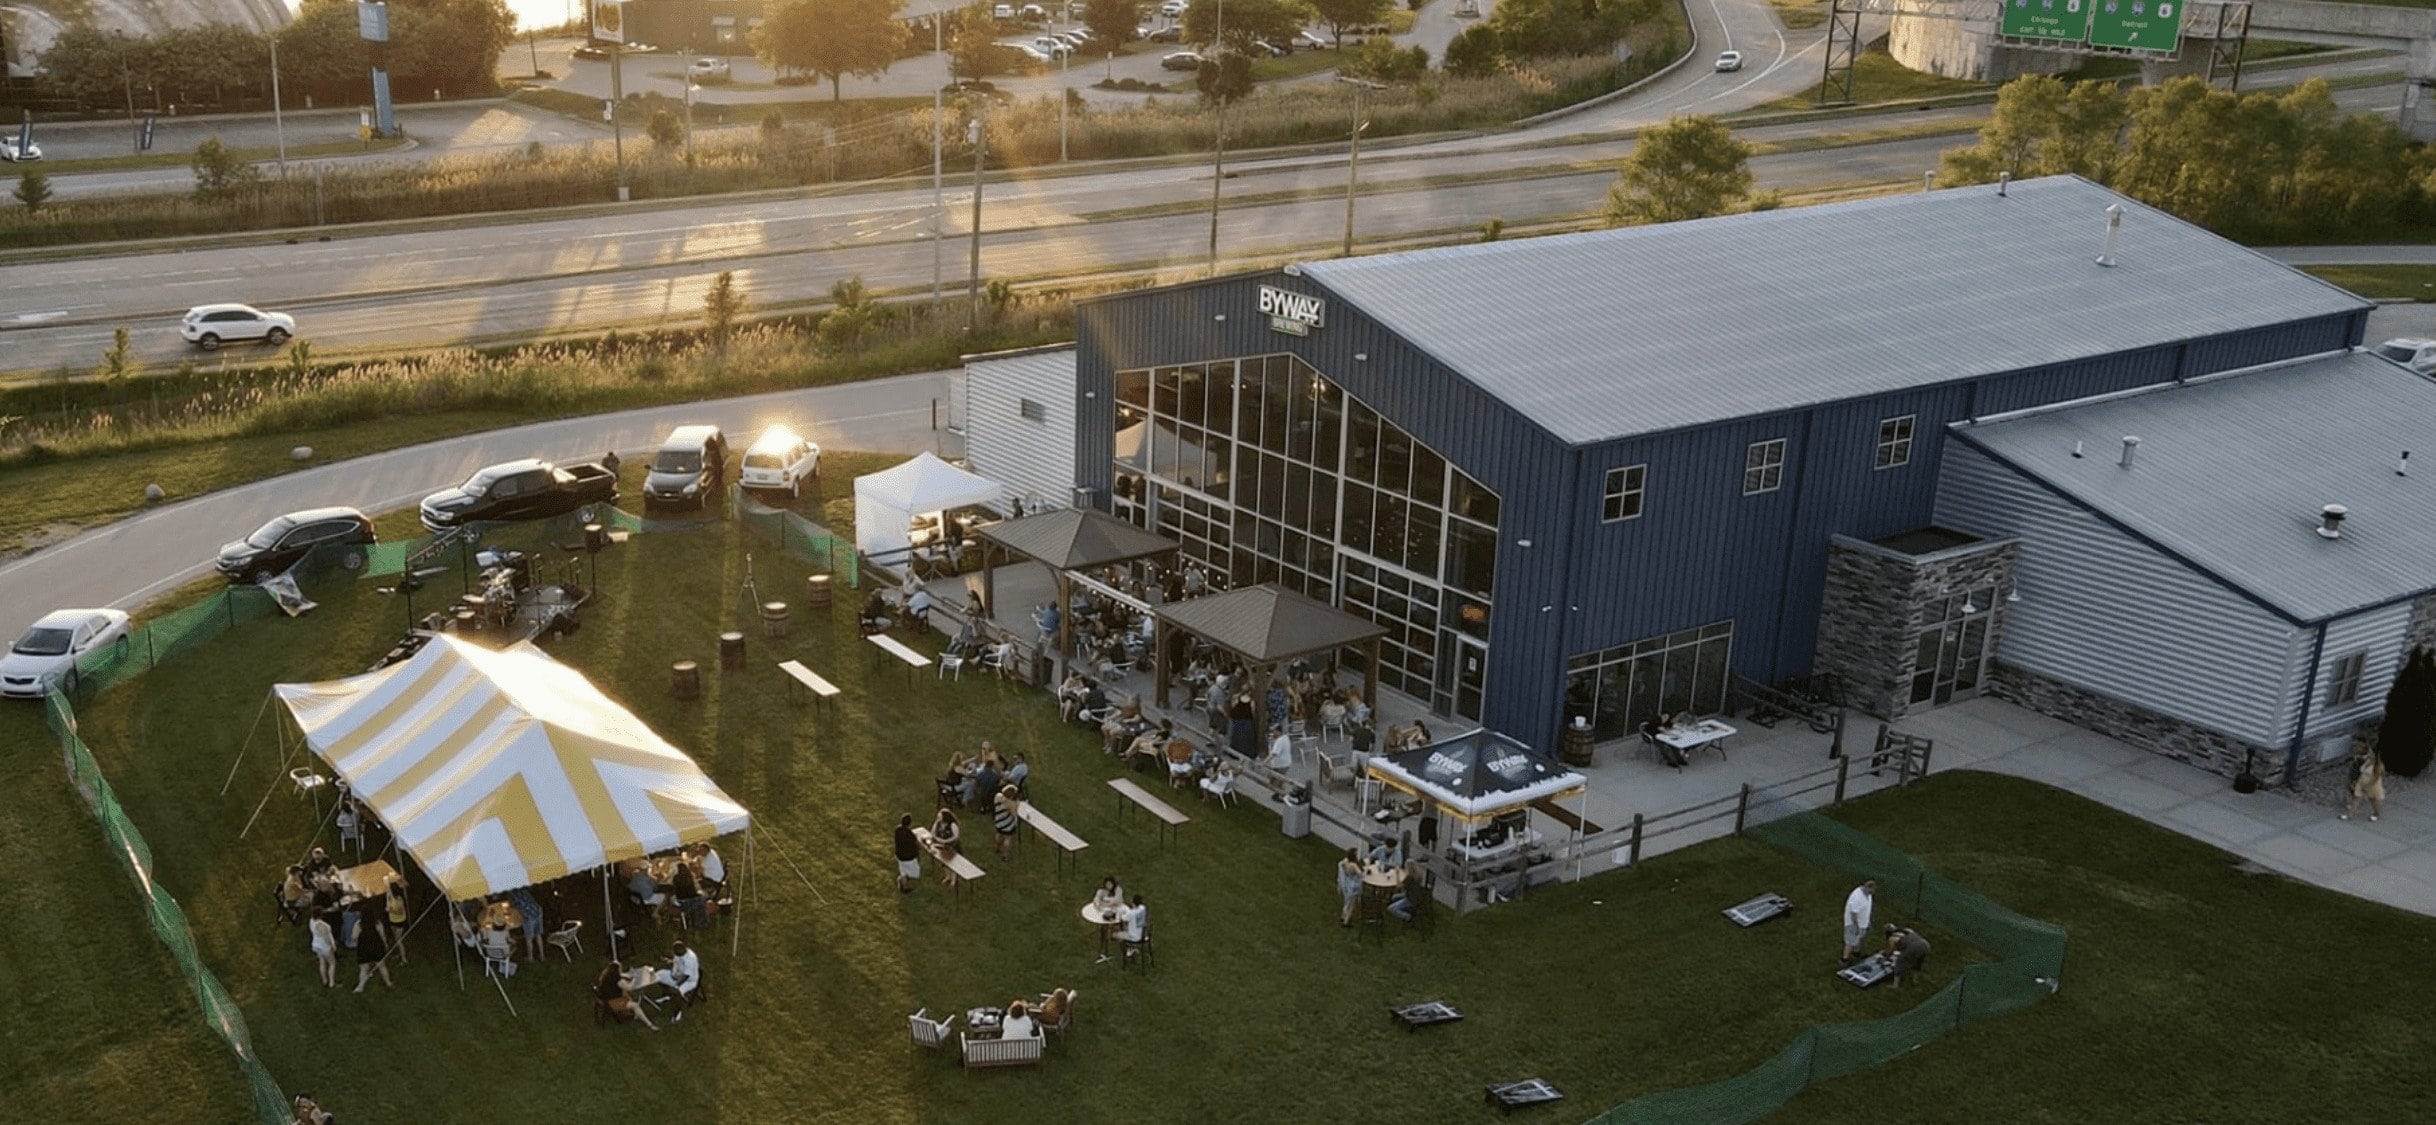 Drone shot of Byway Brewing in Highland, IN